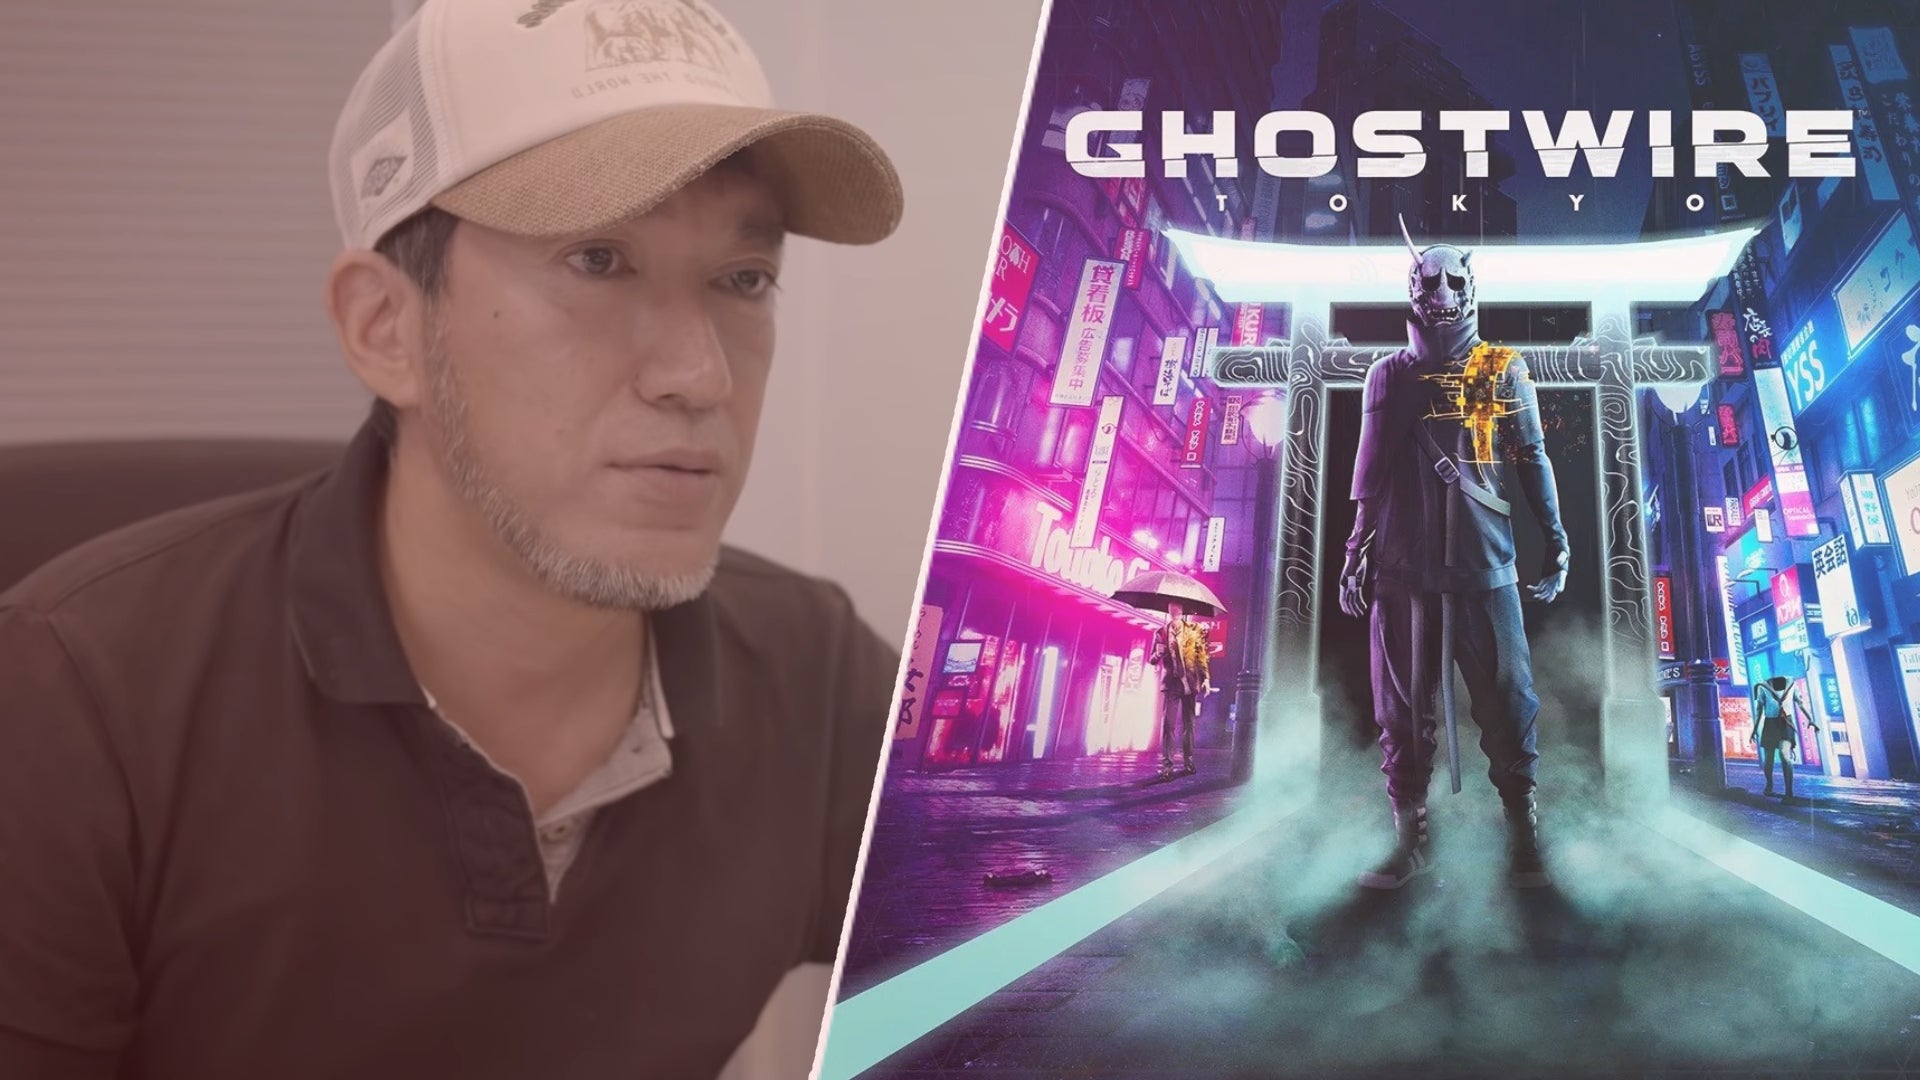 Creating a house of horror: Shinji Mikami on Tango Gameworks' road to Ghostwire: Tokyo | VG247